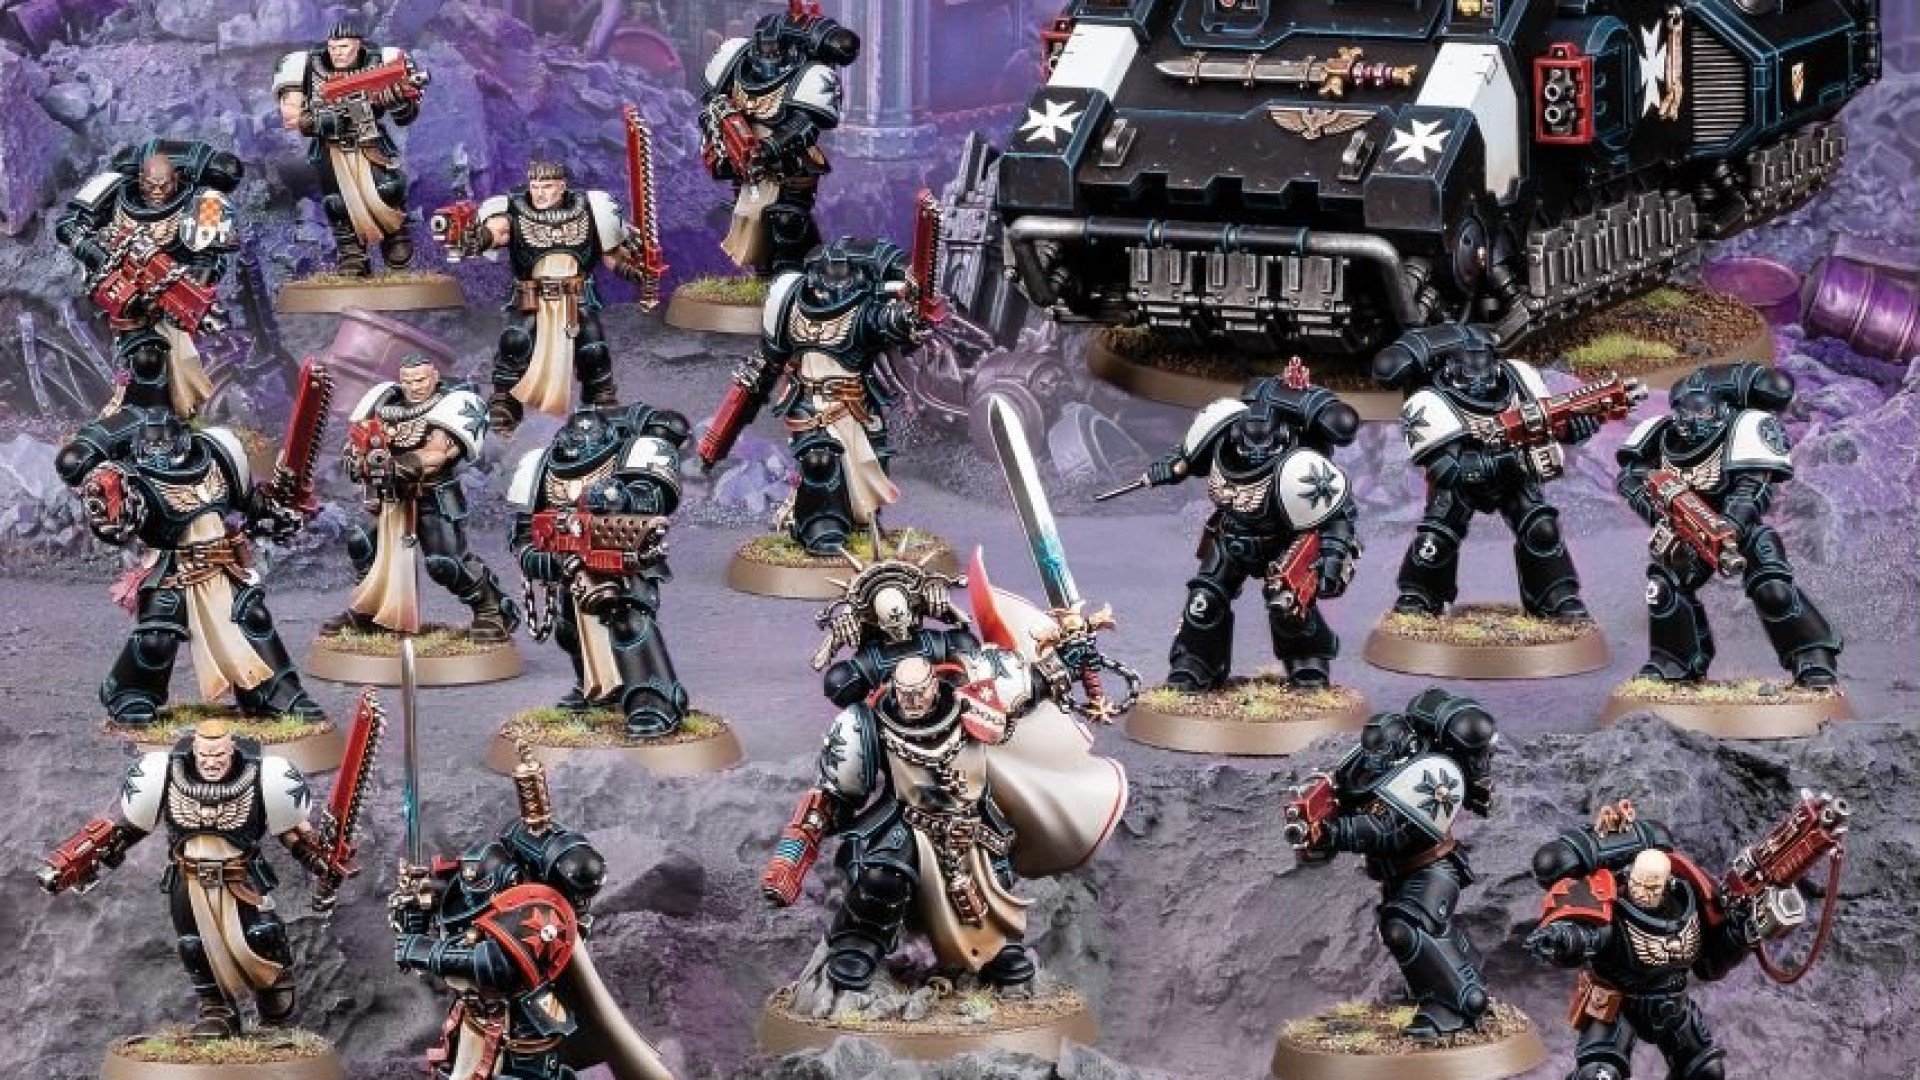 Warhammer 40k army in a box: your guide to Combat Patrols | Wargamer